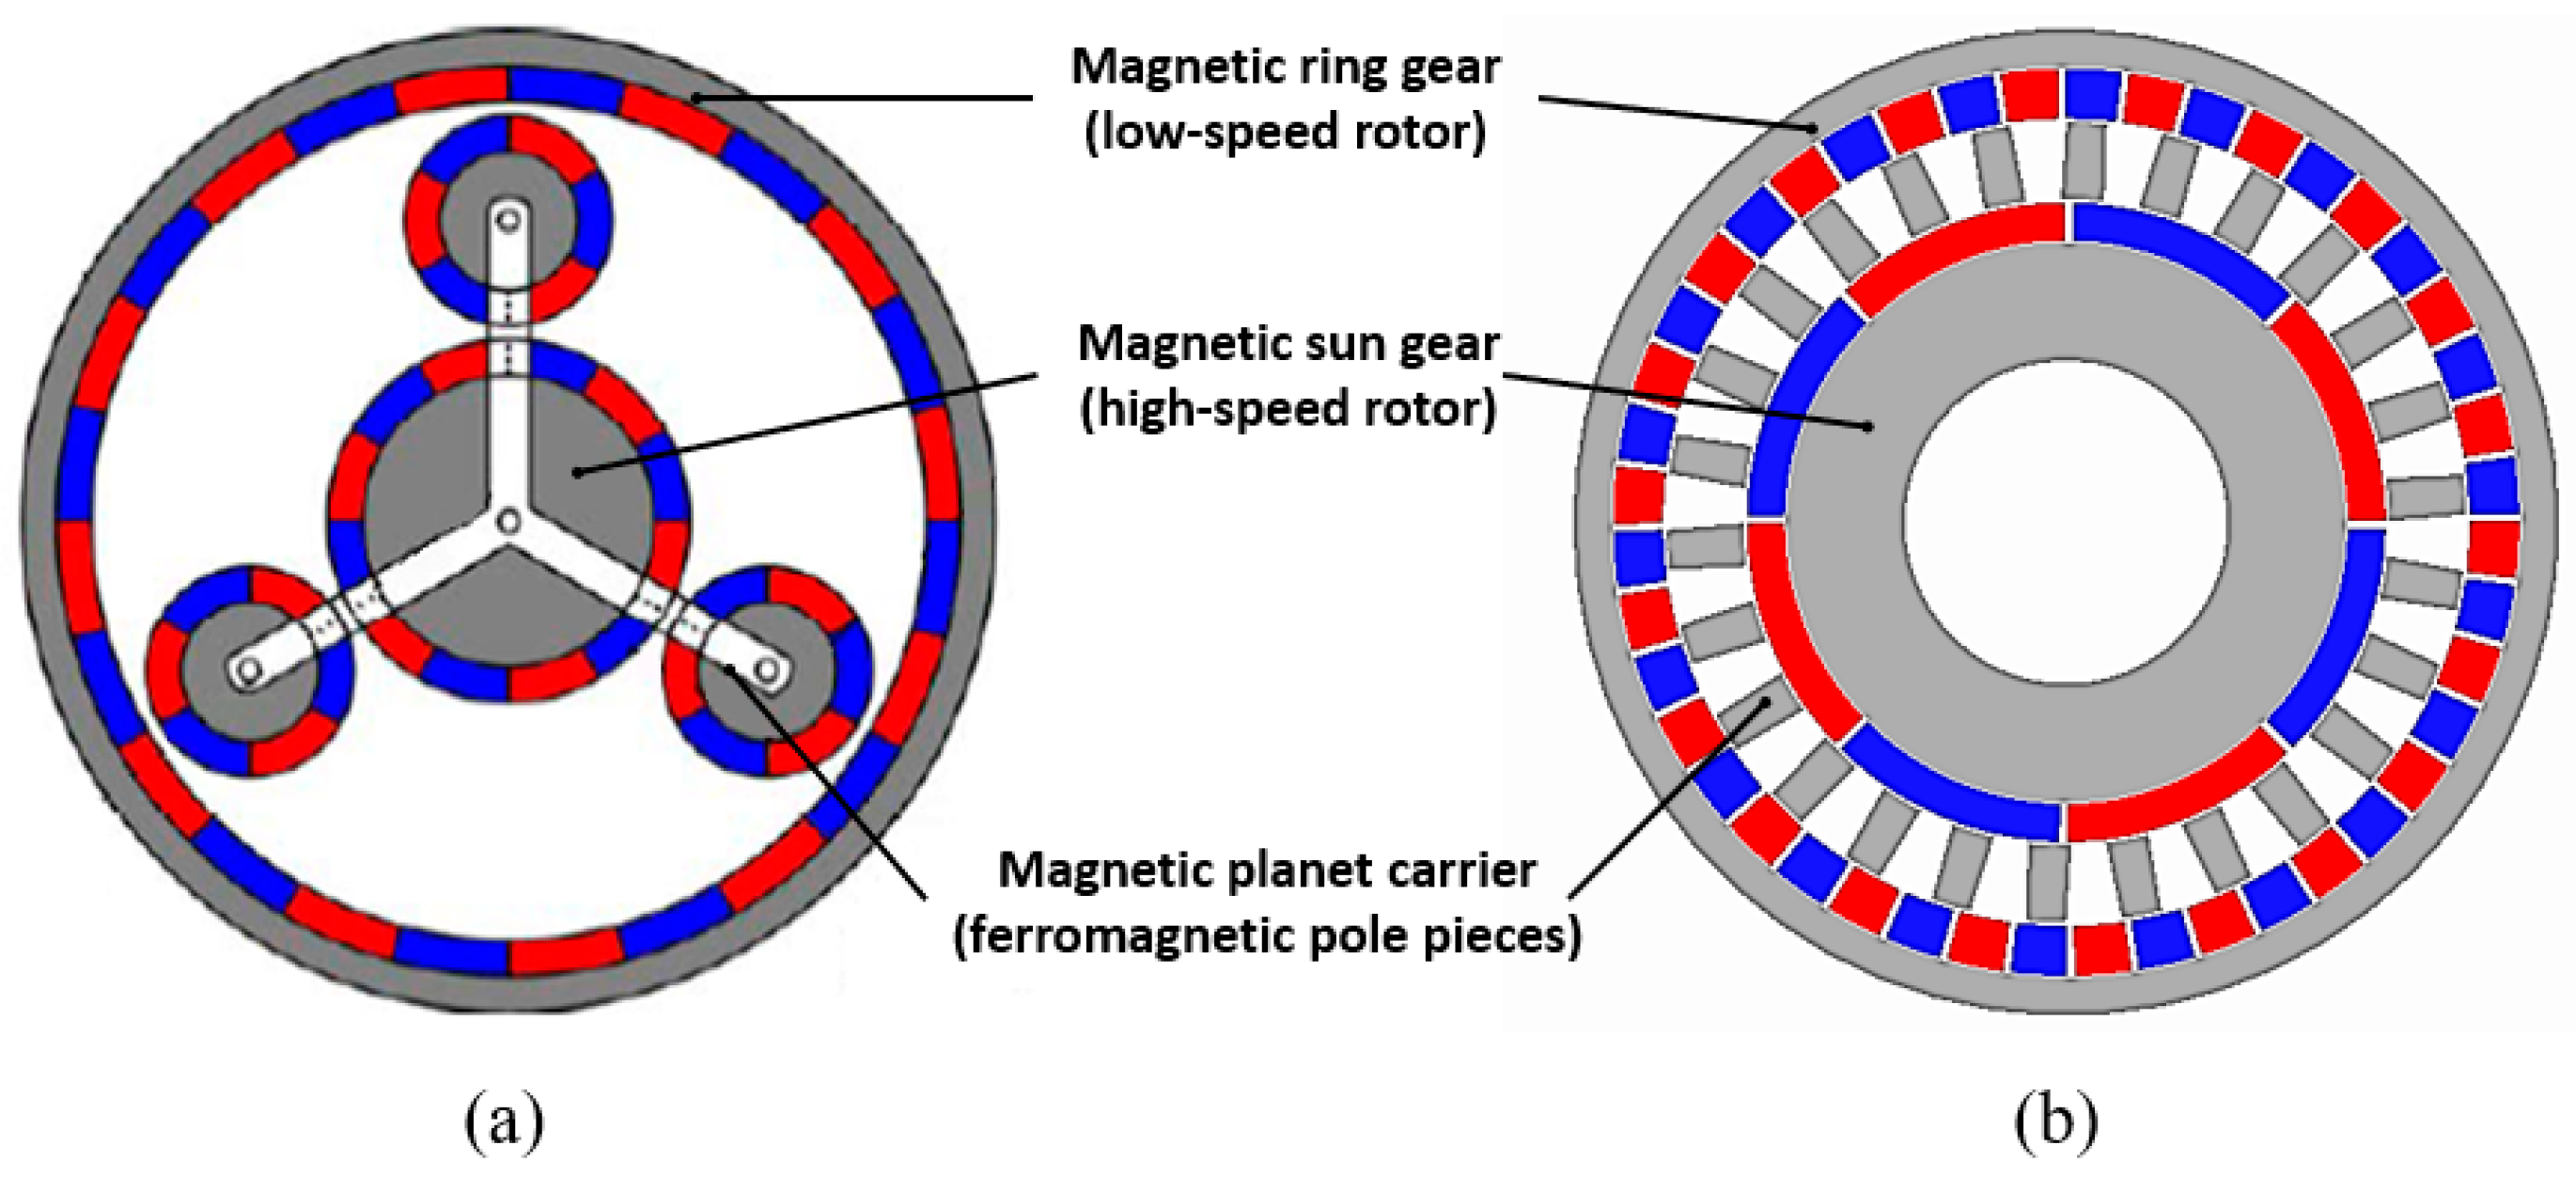 Energies | Free Full-Text | A Review of Magnetic Gear Technologies Used in  Mechanical Power Transmission